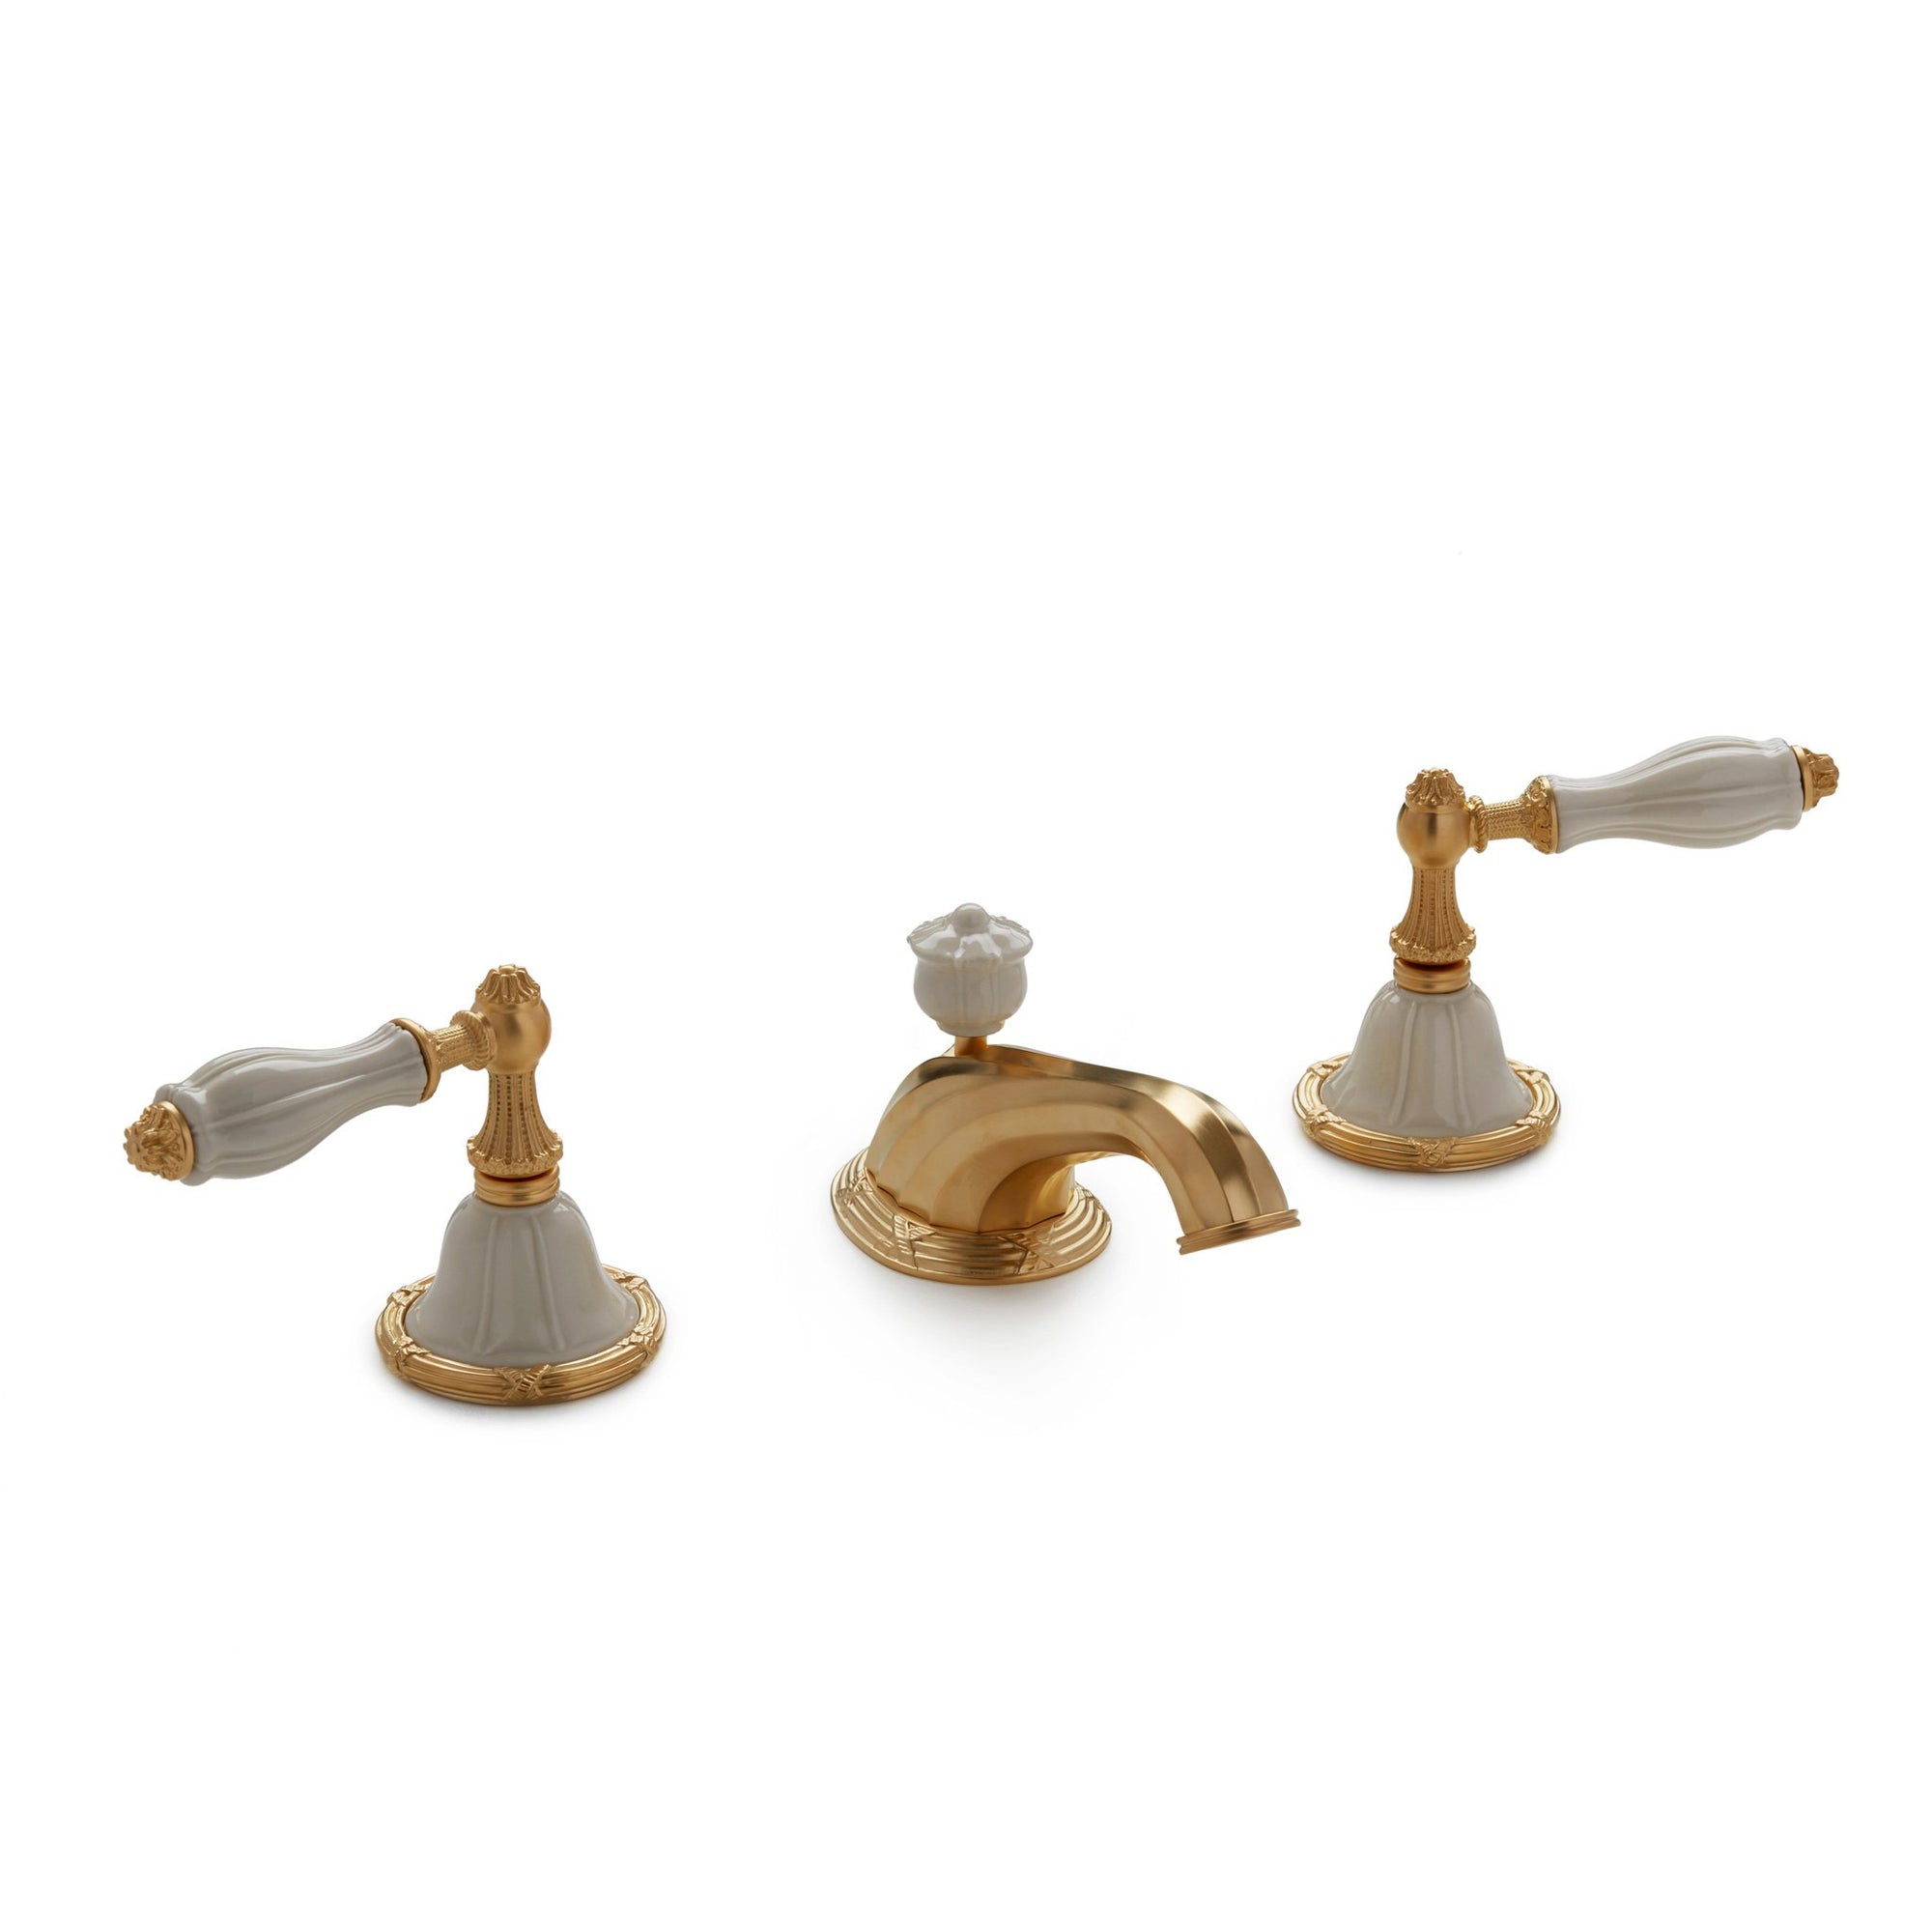 0914BSN818-03SD-GP Sherle Wagner International Scalloped Ceramic Empire Lever Faucet Set in Gold Plate metal finish with Sand Glaze inserts